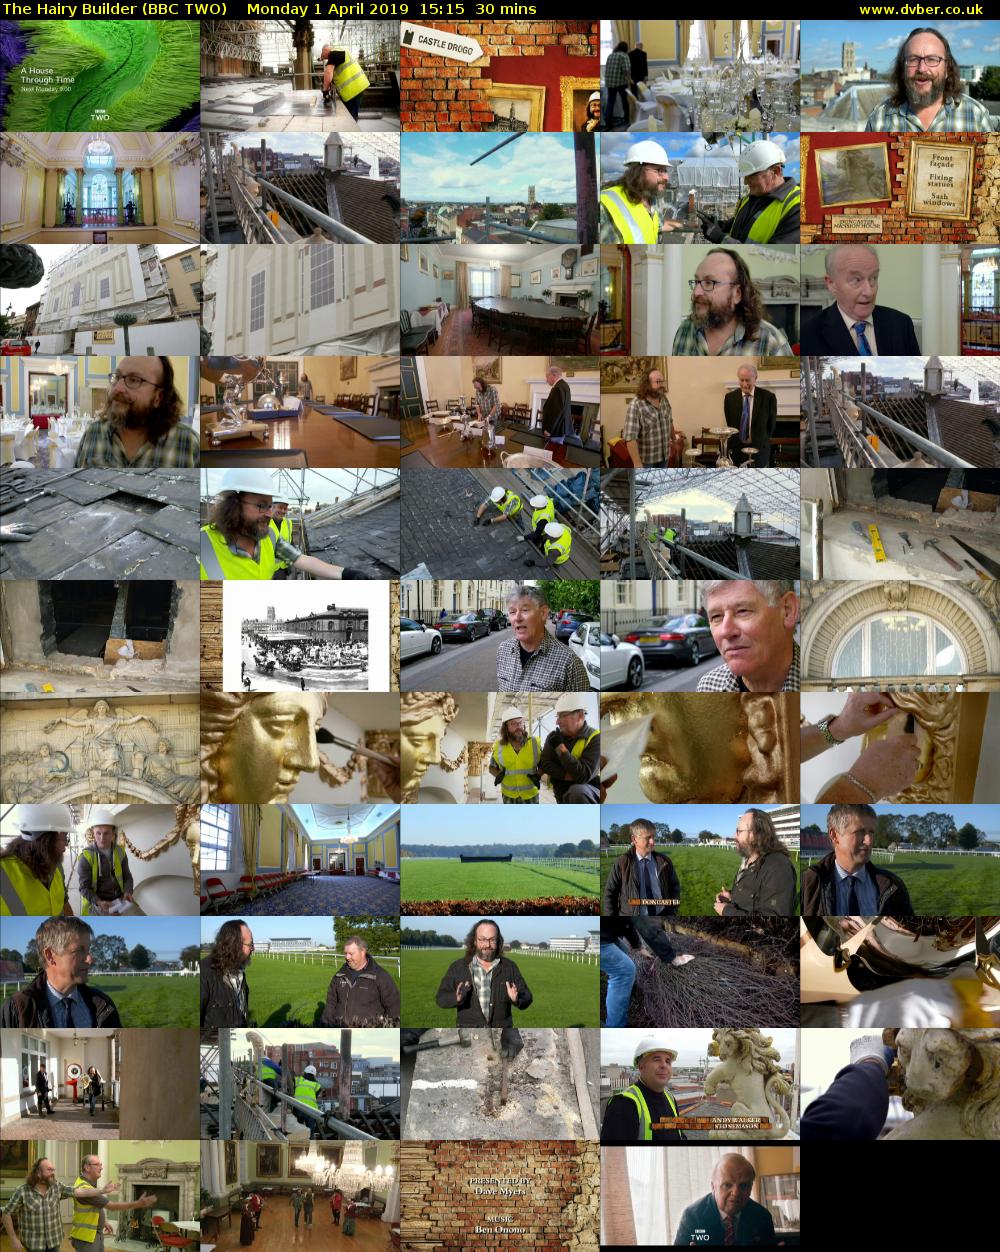 The Hairy Builder (BBC TWO) Monday 1 April 2019 15:15 - 15:45